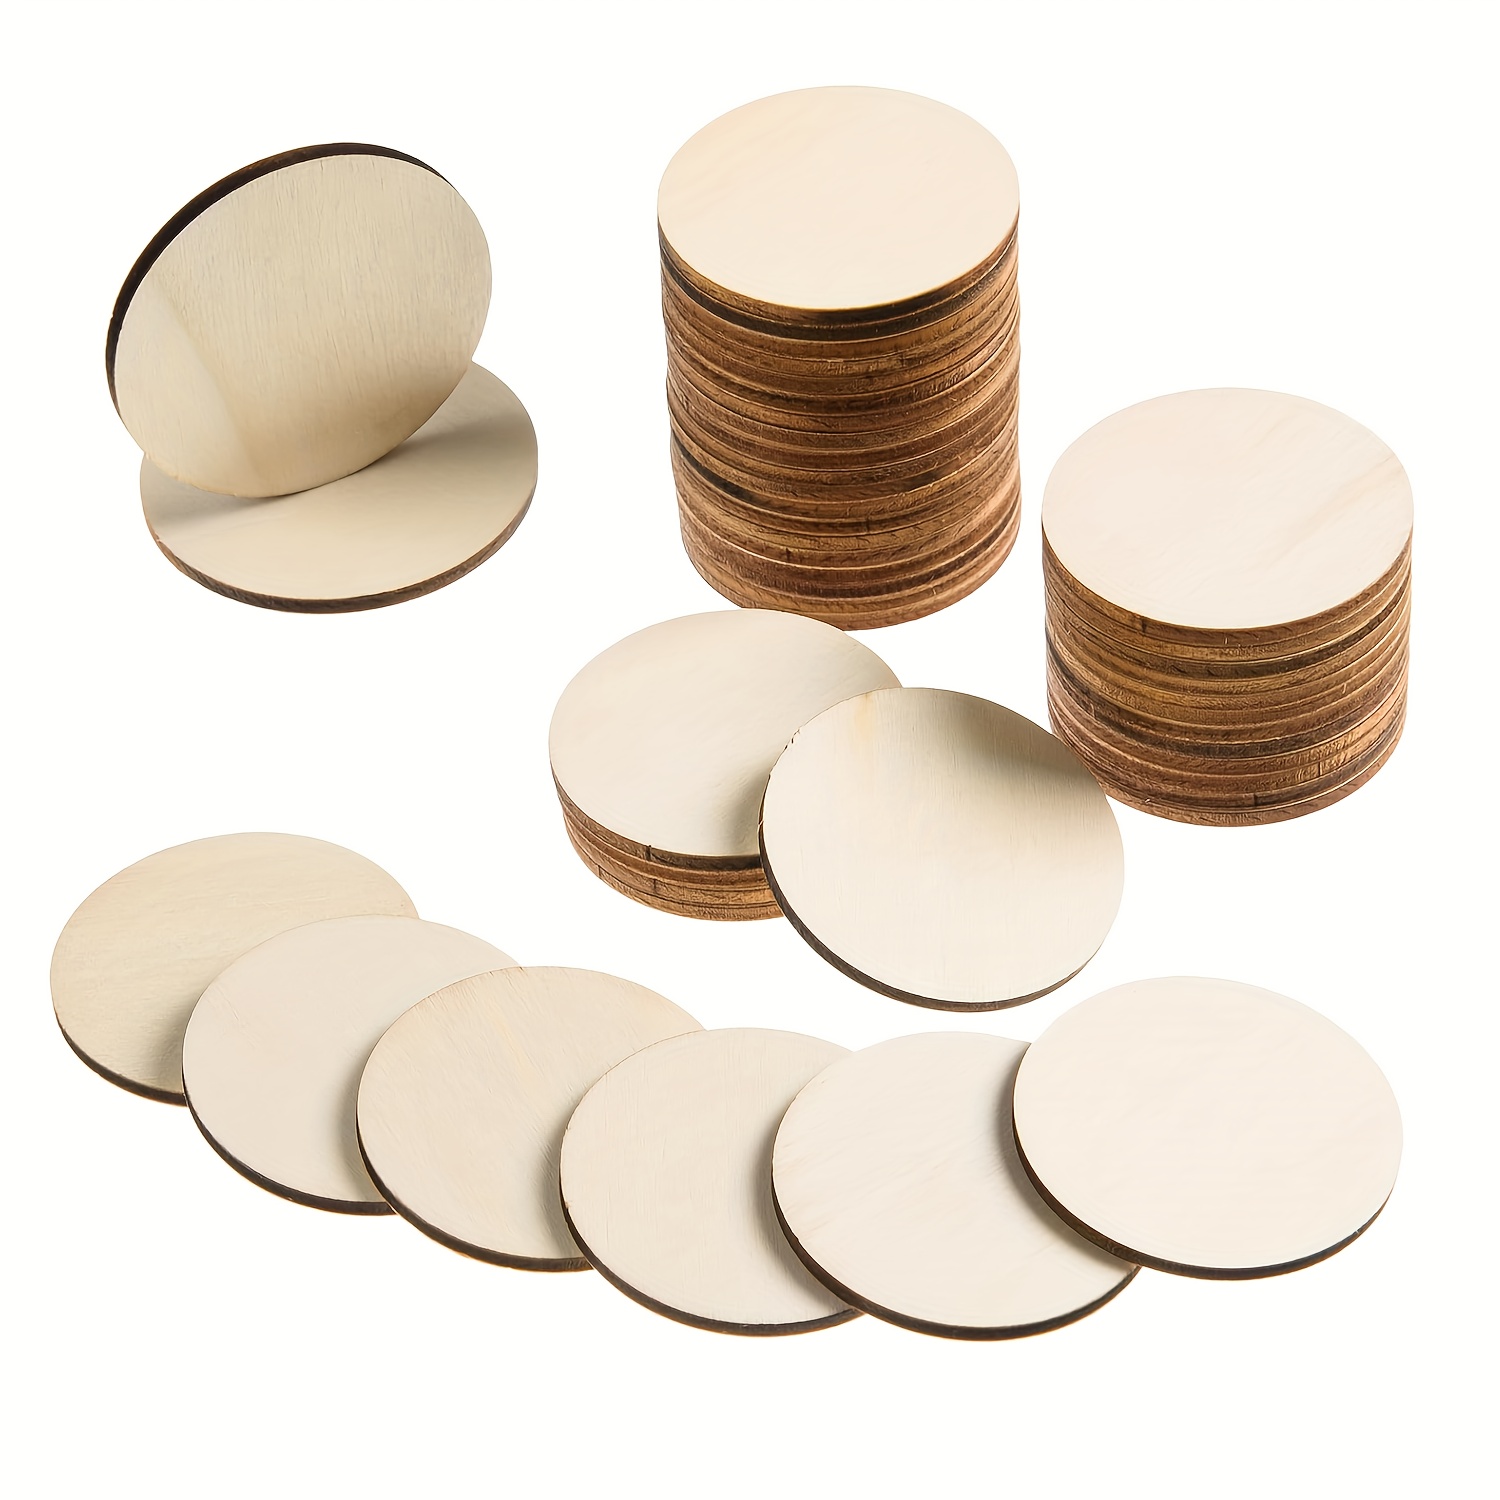 10x Unfinished Wooden Round Circle Discs Blank Embellishments DIY Art  Crafts